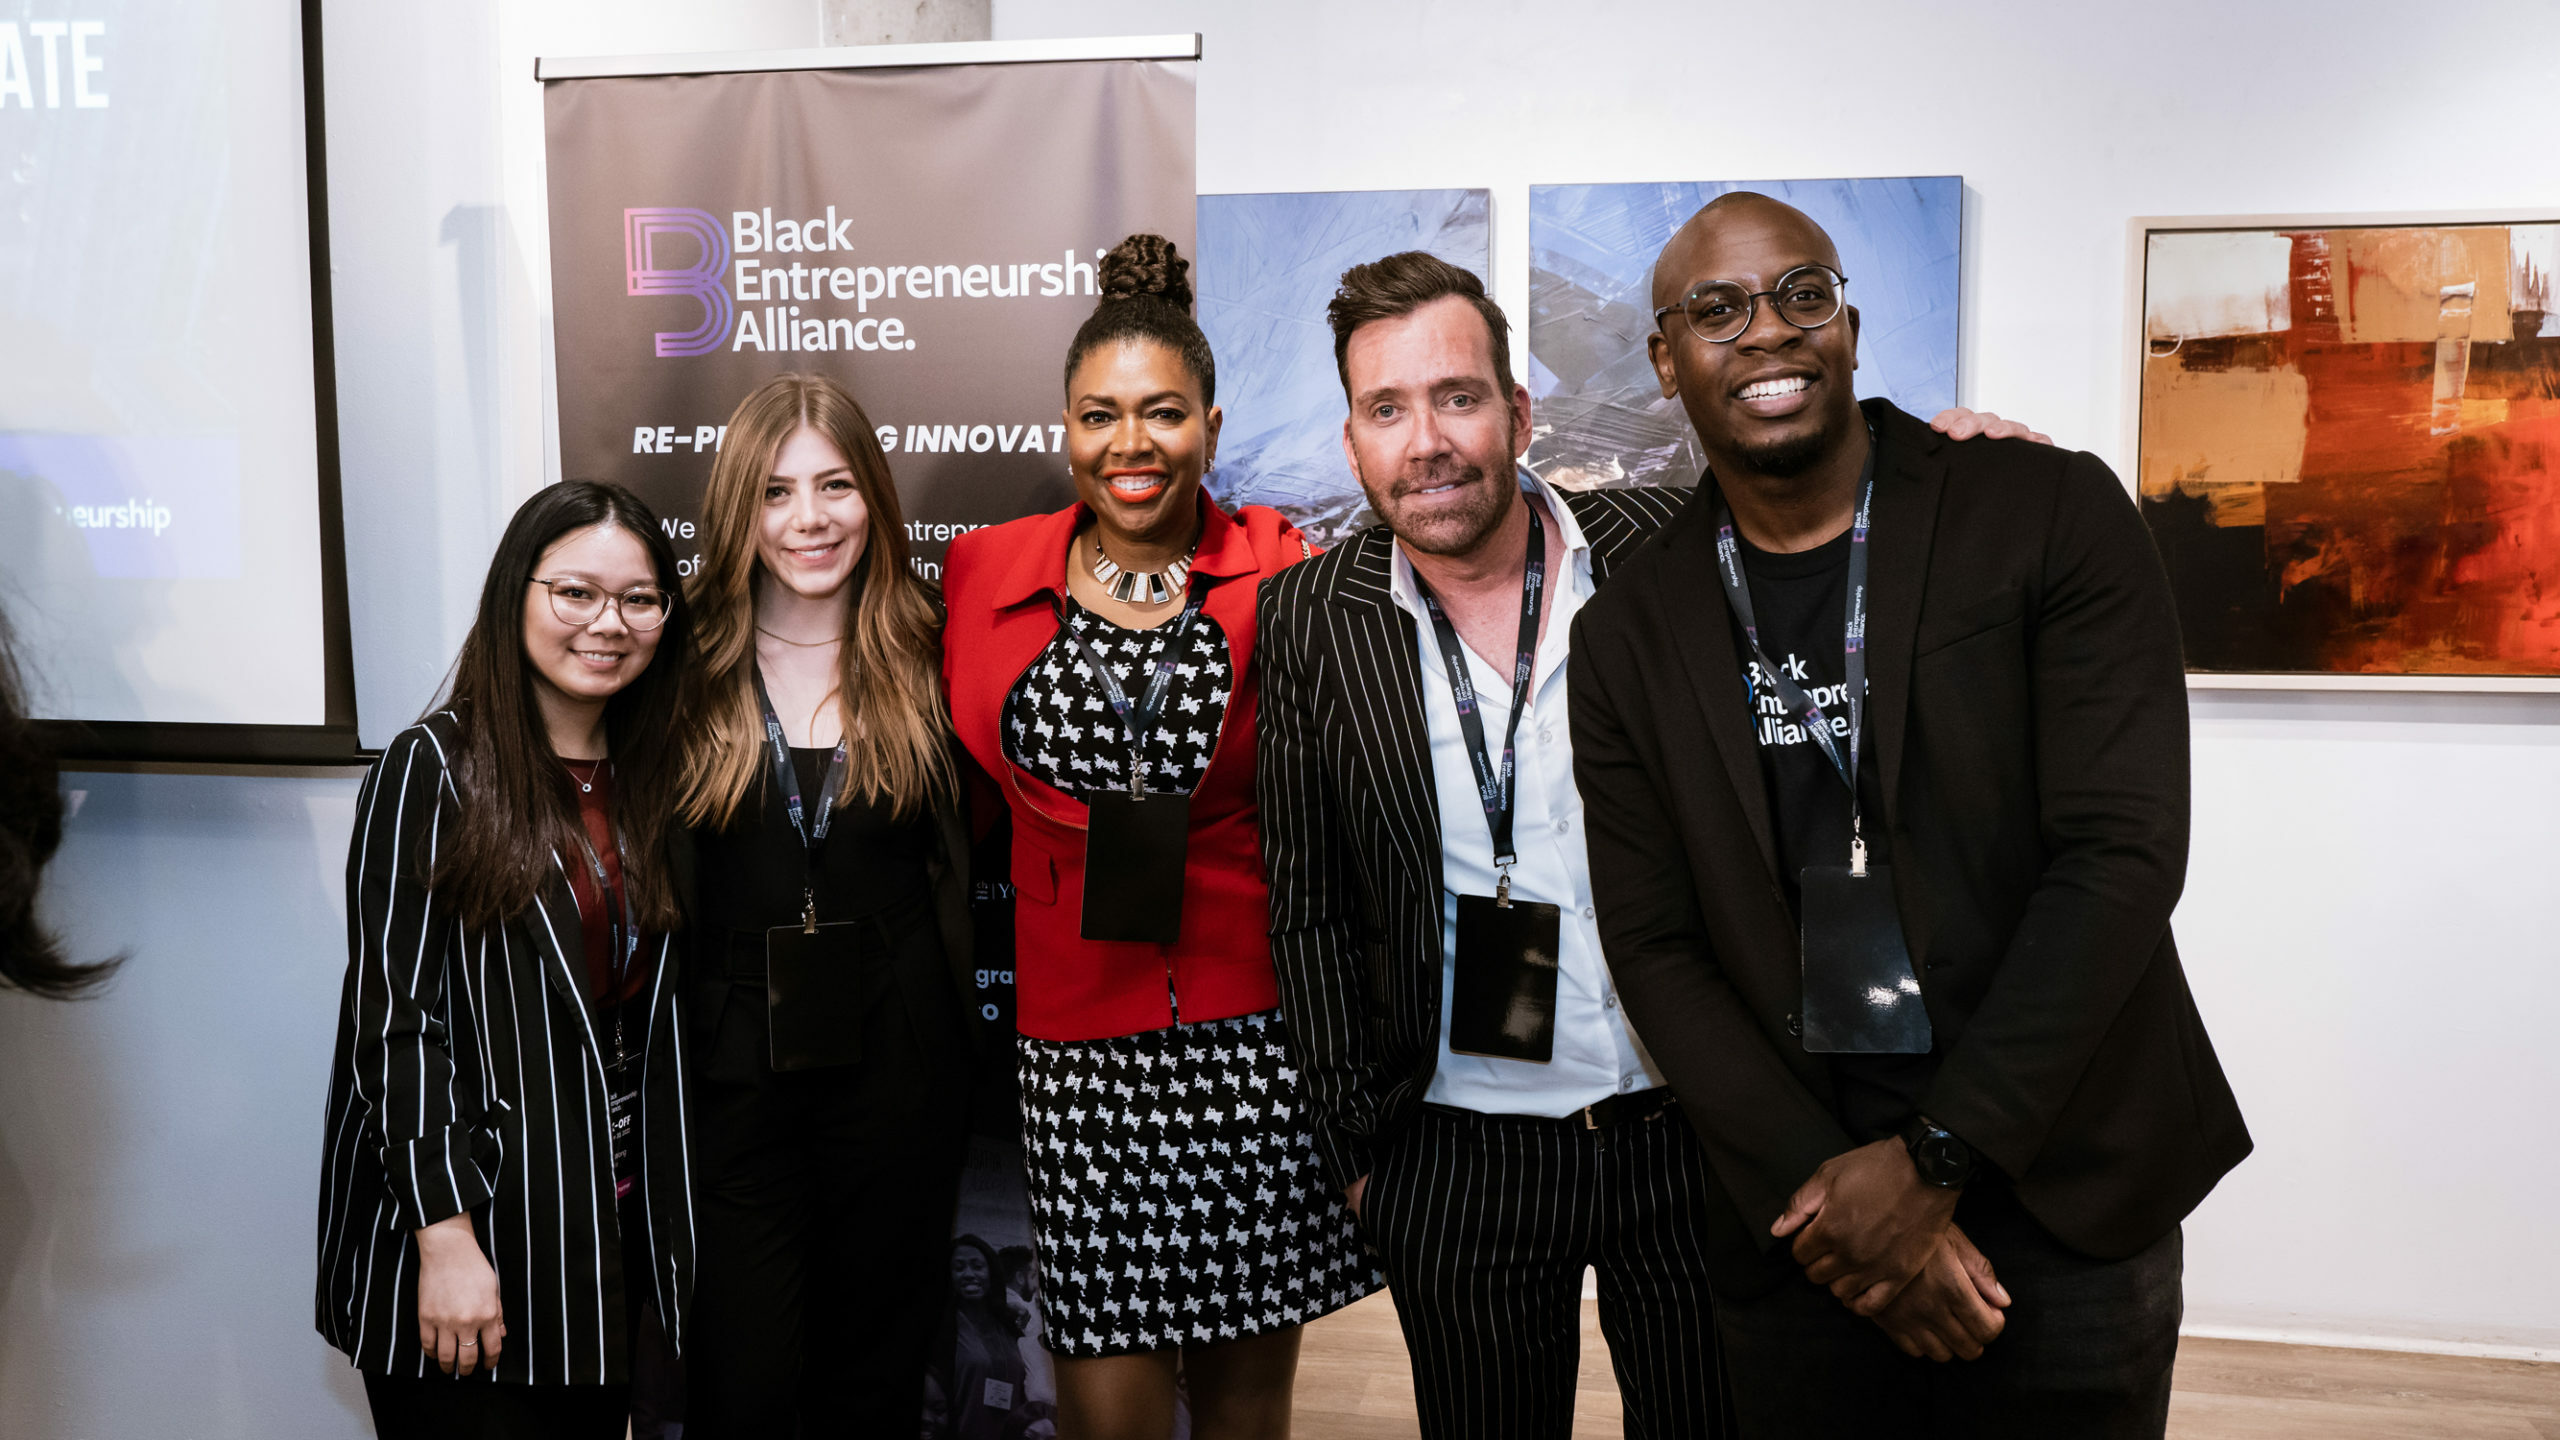 Schulich ExecEd and York University Unites With the Black Entrepreneurship Alliance; Empowerment Through Programming